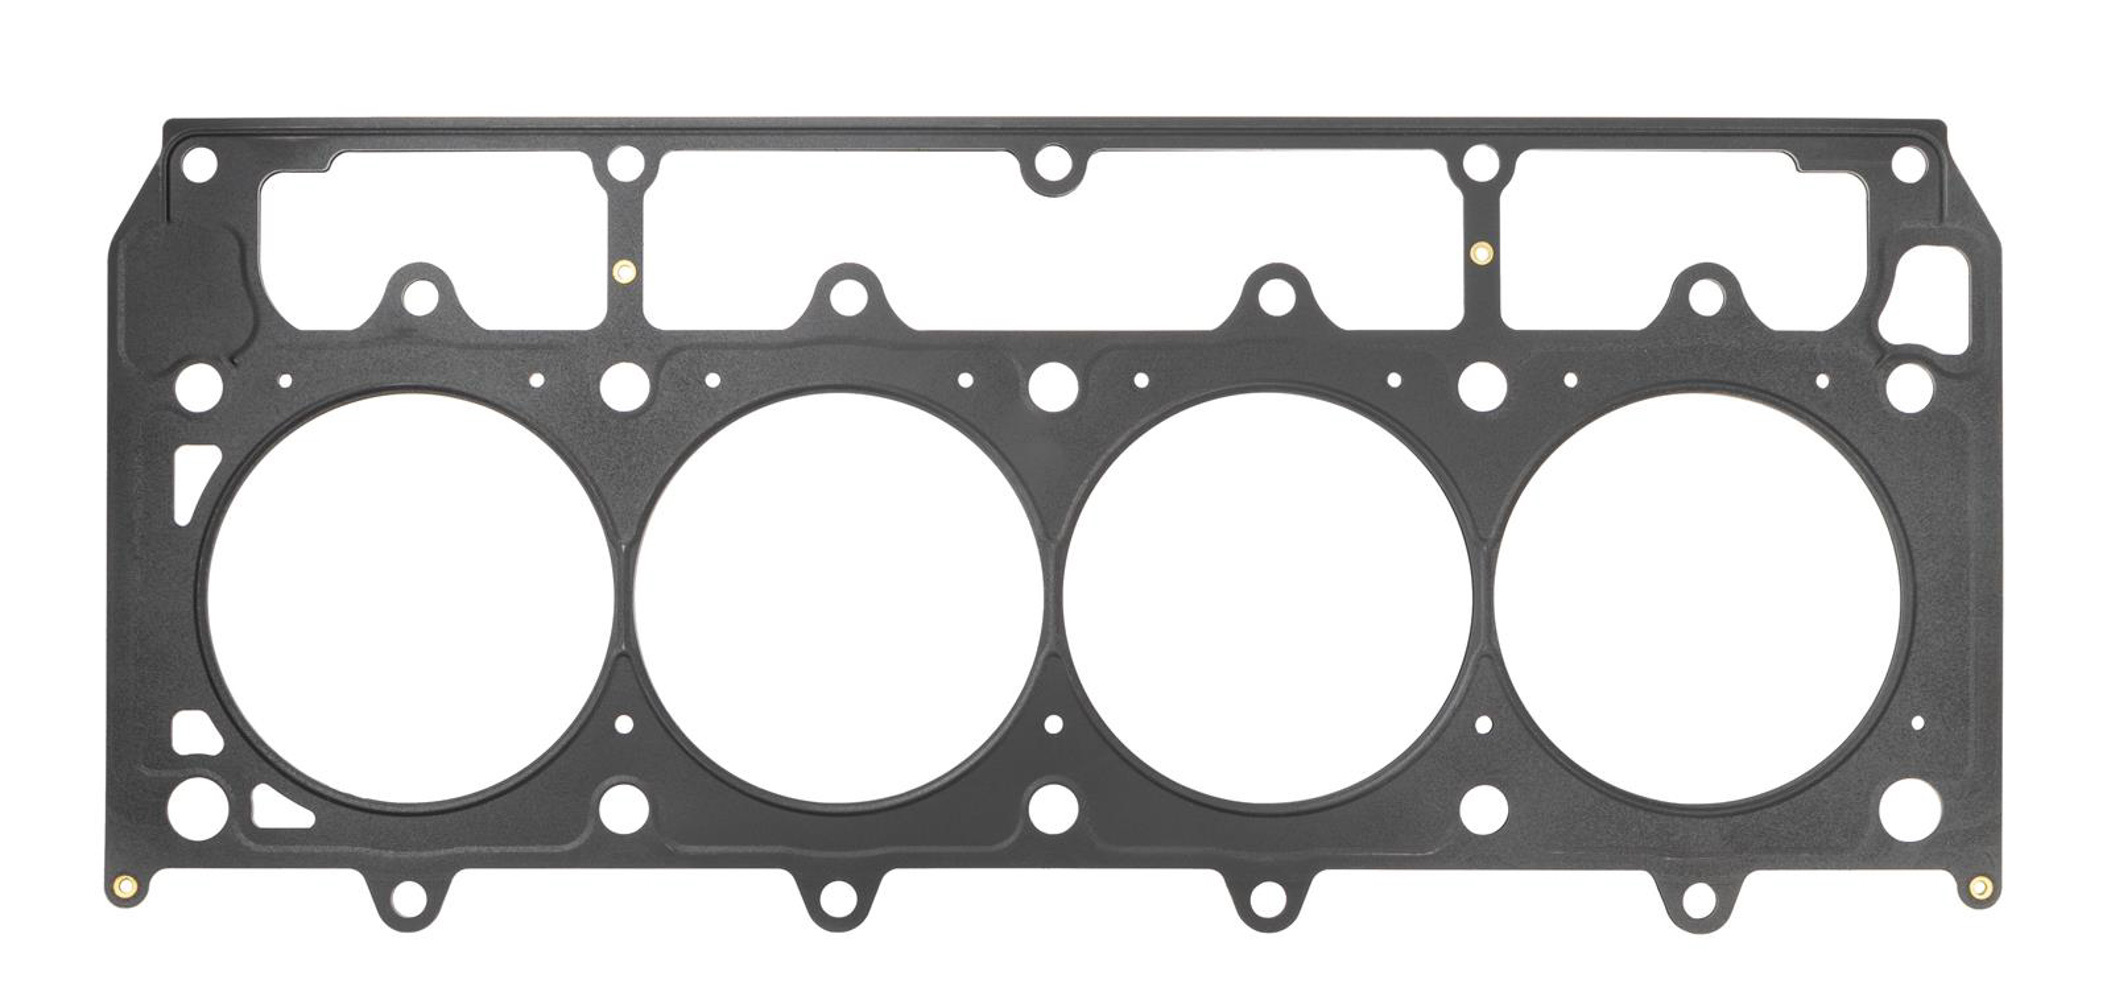 SCE Gaskets M192051R - Cylinder Head Gasket, MLS Spartan, 4.201 in Bore, 0.051 in Compression Thickness, Multi-Layer Steel, Passenger Side, GM LS-Series, Each